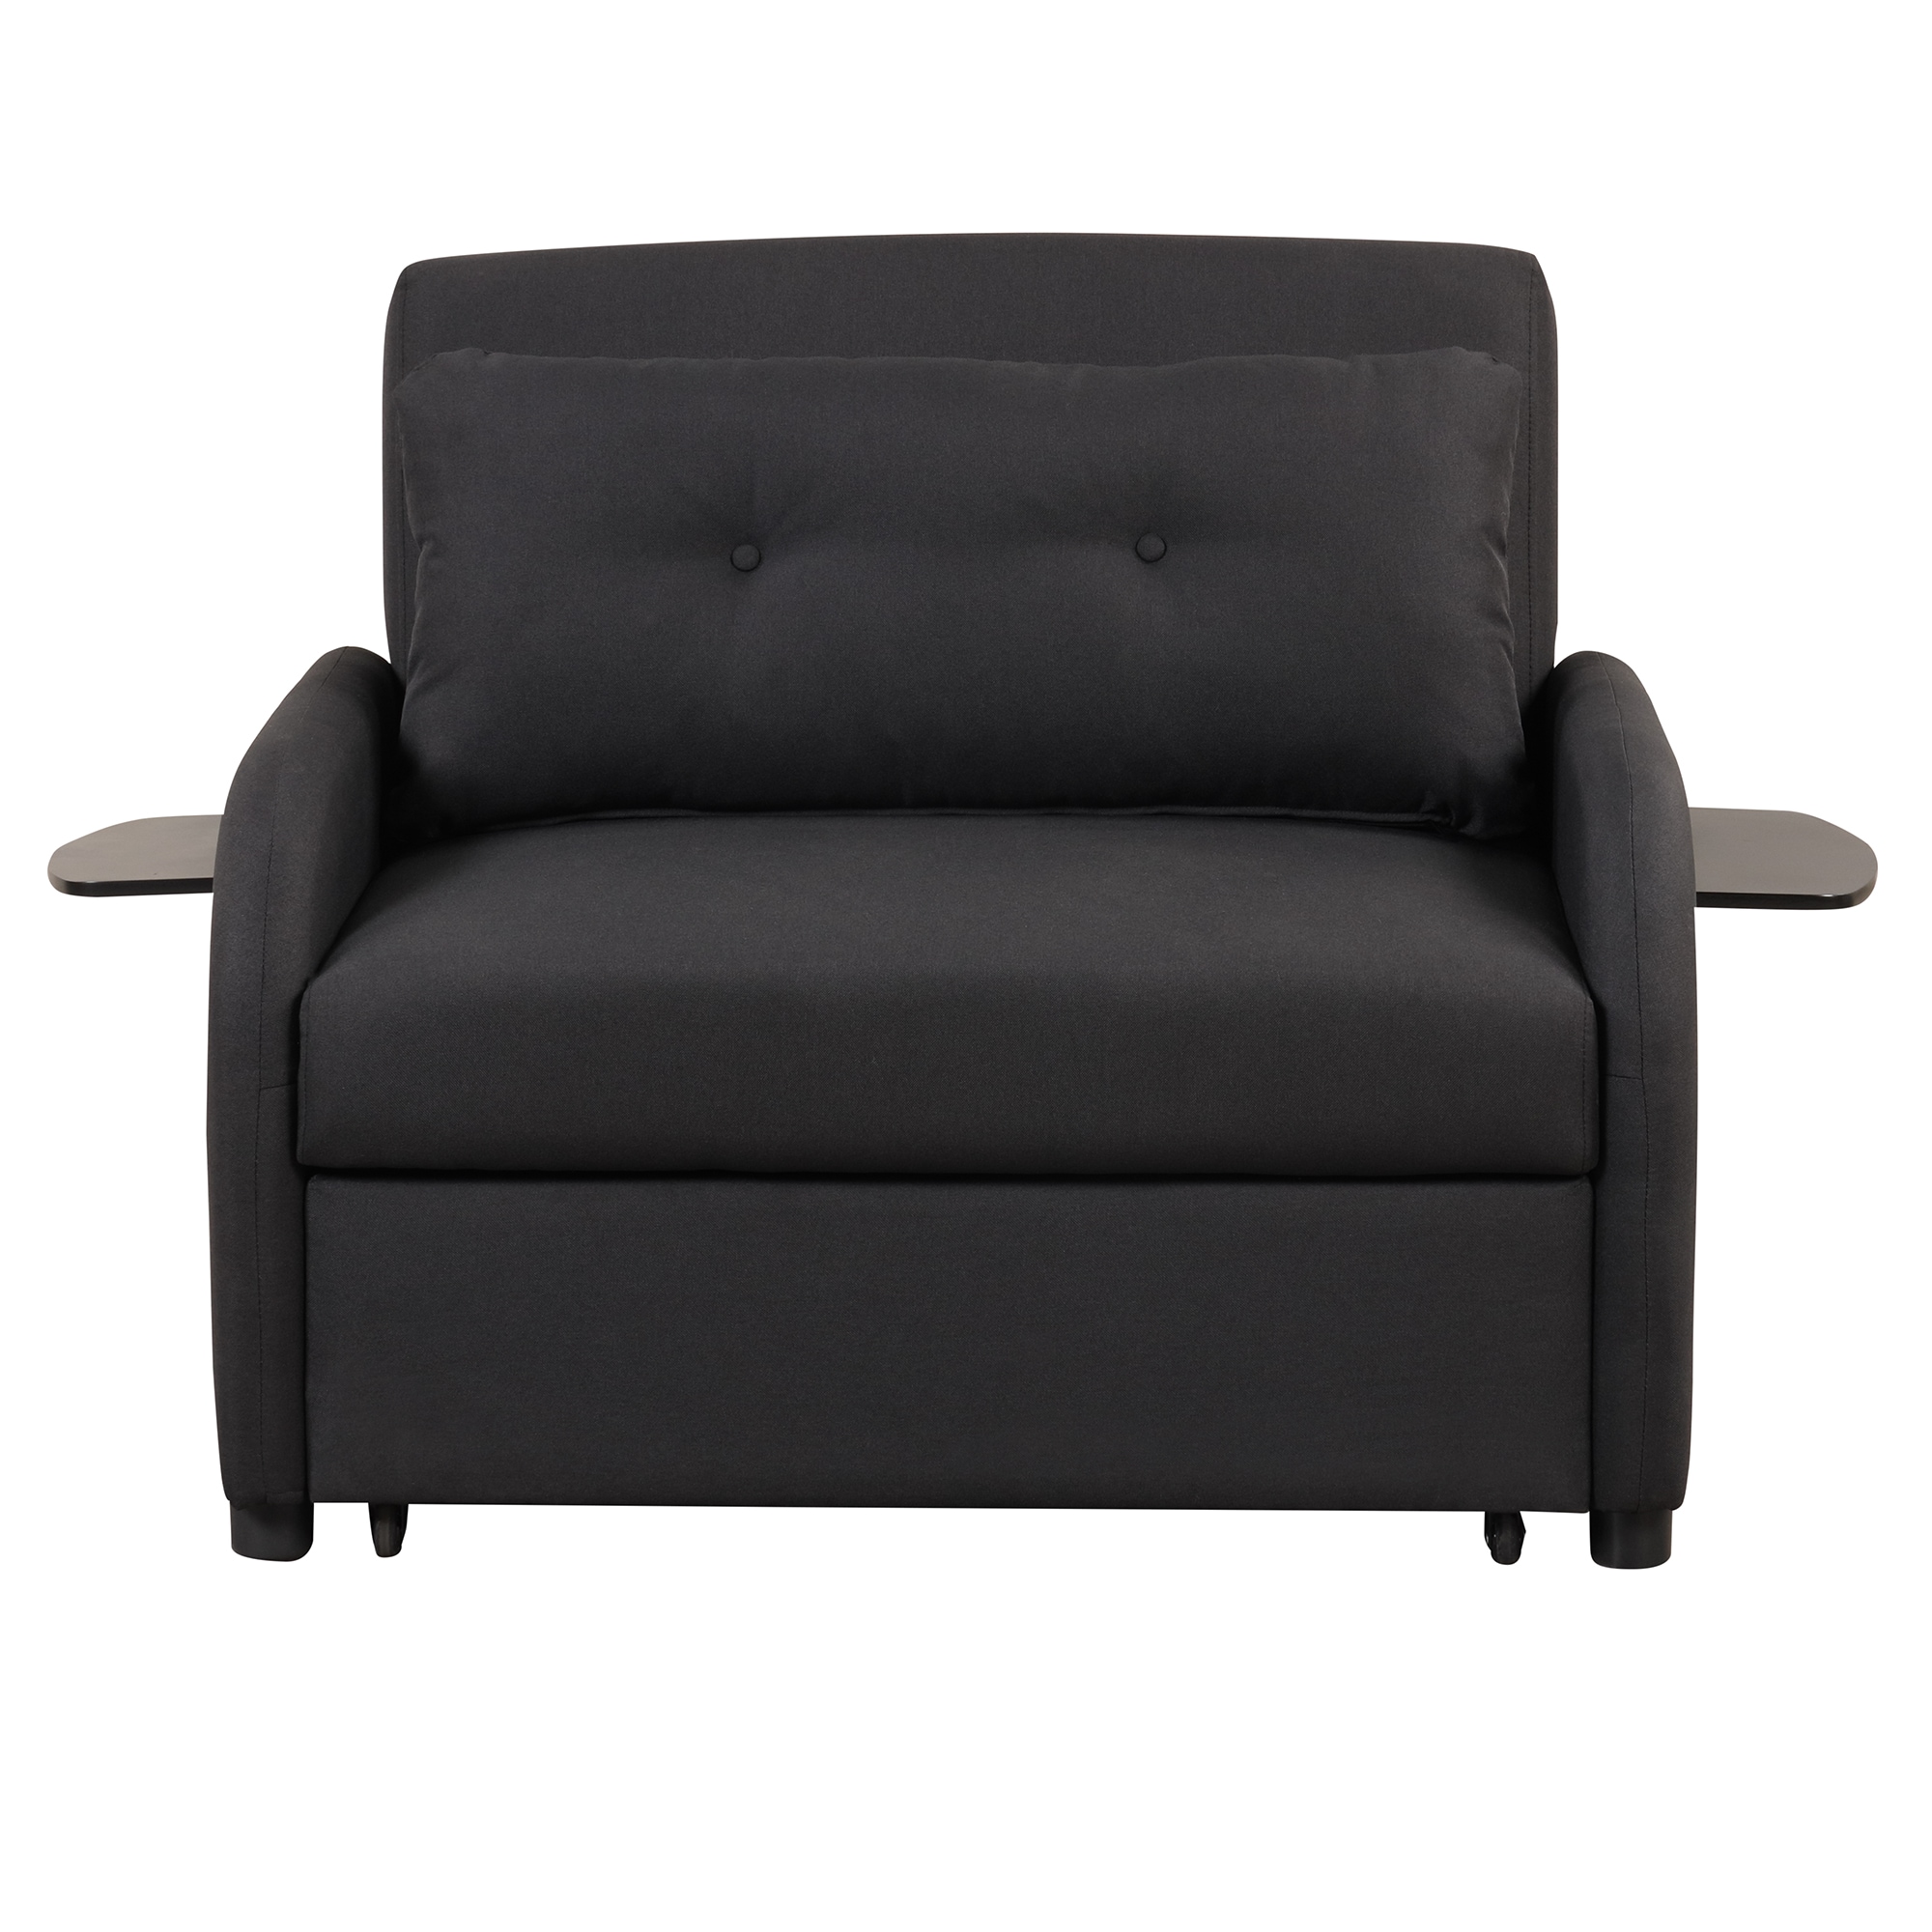 Mondawe Black Linen Upholstered Powered Reclining Recliner at Lowes.com